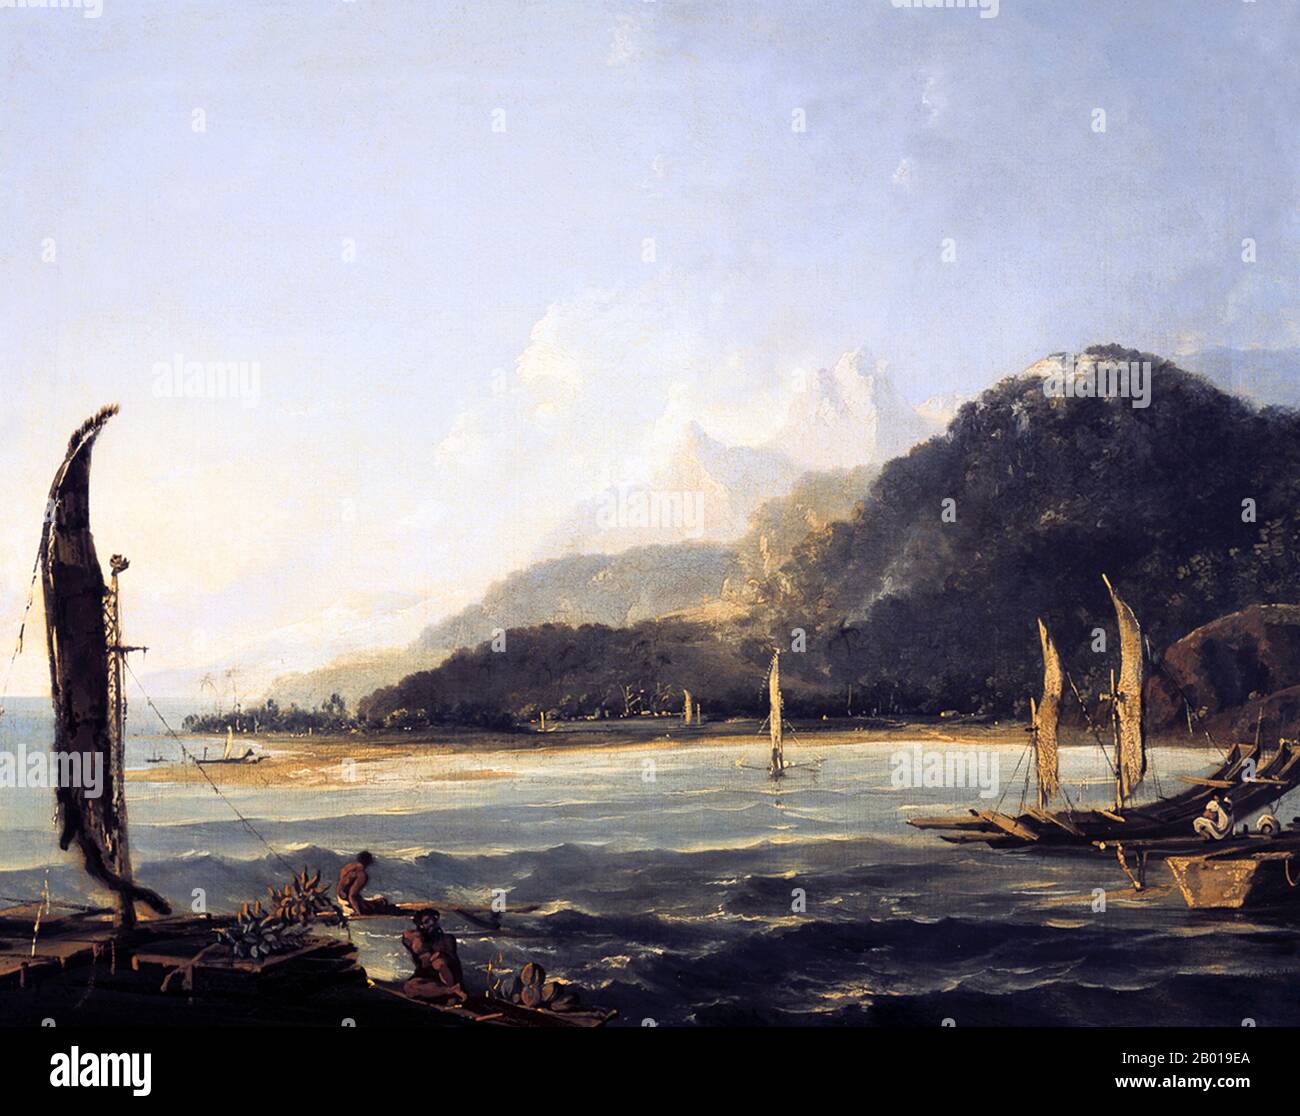 Tahiti: 'A View of Matavai Bay'. Oil on canvas painting by William Hodges (28 October 1744 - 6 March 1797), c. 1775.  William Hodges was an English painter. He was a member of James Cook's second voyage to the Pacific Ocean, and is best known for the sketches and paintings of locations he visited on that voyage, including Table Bay, Tahiti, Easter Island, and the Antarctic. Hodges accompanied Cook to the Pacific as the expedition's artist in 1772-1775. Many of his sketches and wash paintings were adapted as engravings in the original published edition of Cook's journals from the voyage. Stock Photo